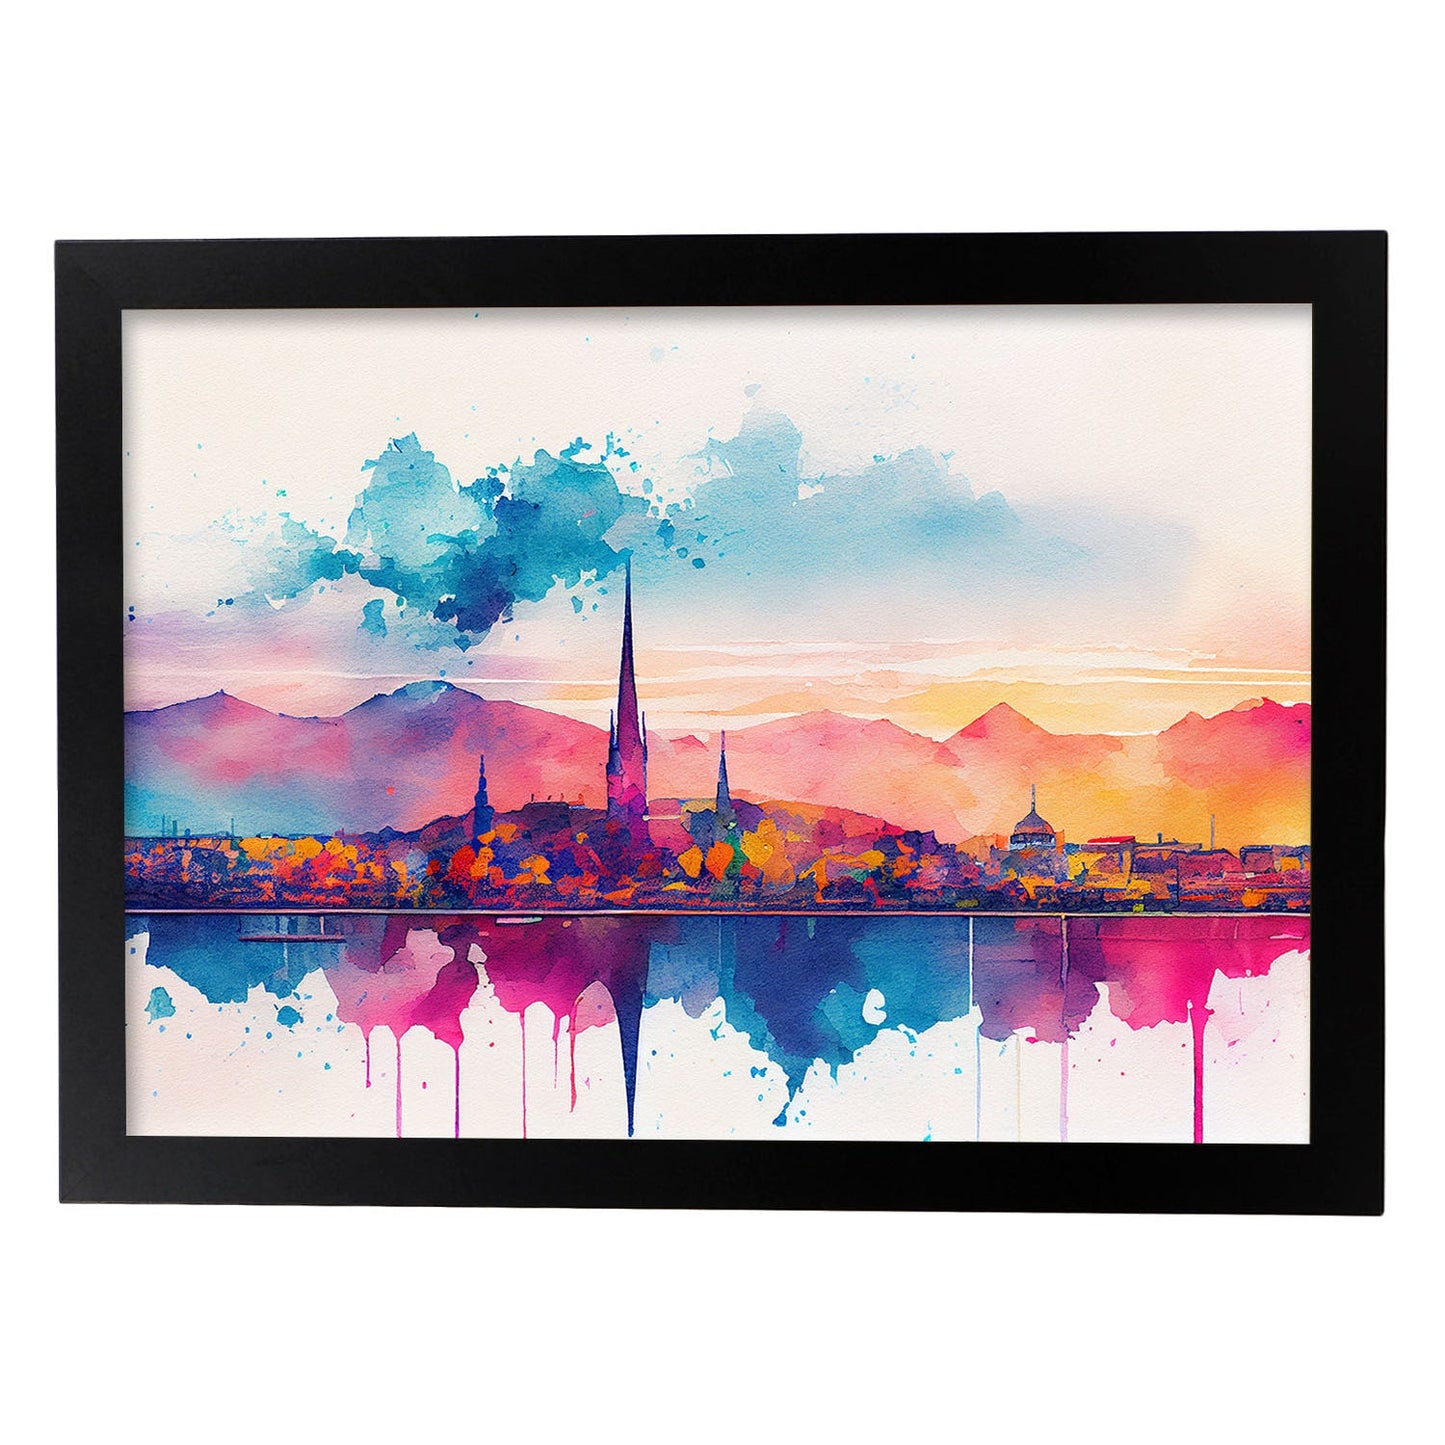 Nacnic watercolor of a skyline of the city of Geneva_1. Aesthetic Wall Art Prints for Bedroom or Living Room Design.